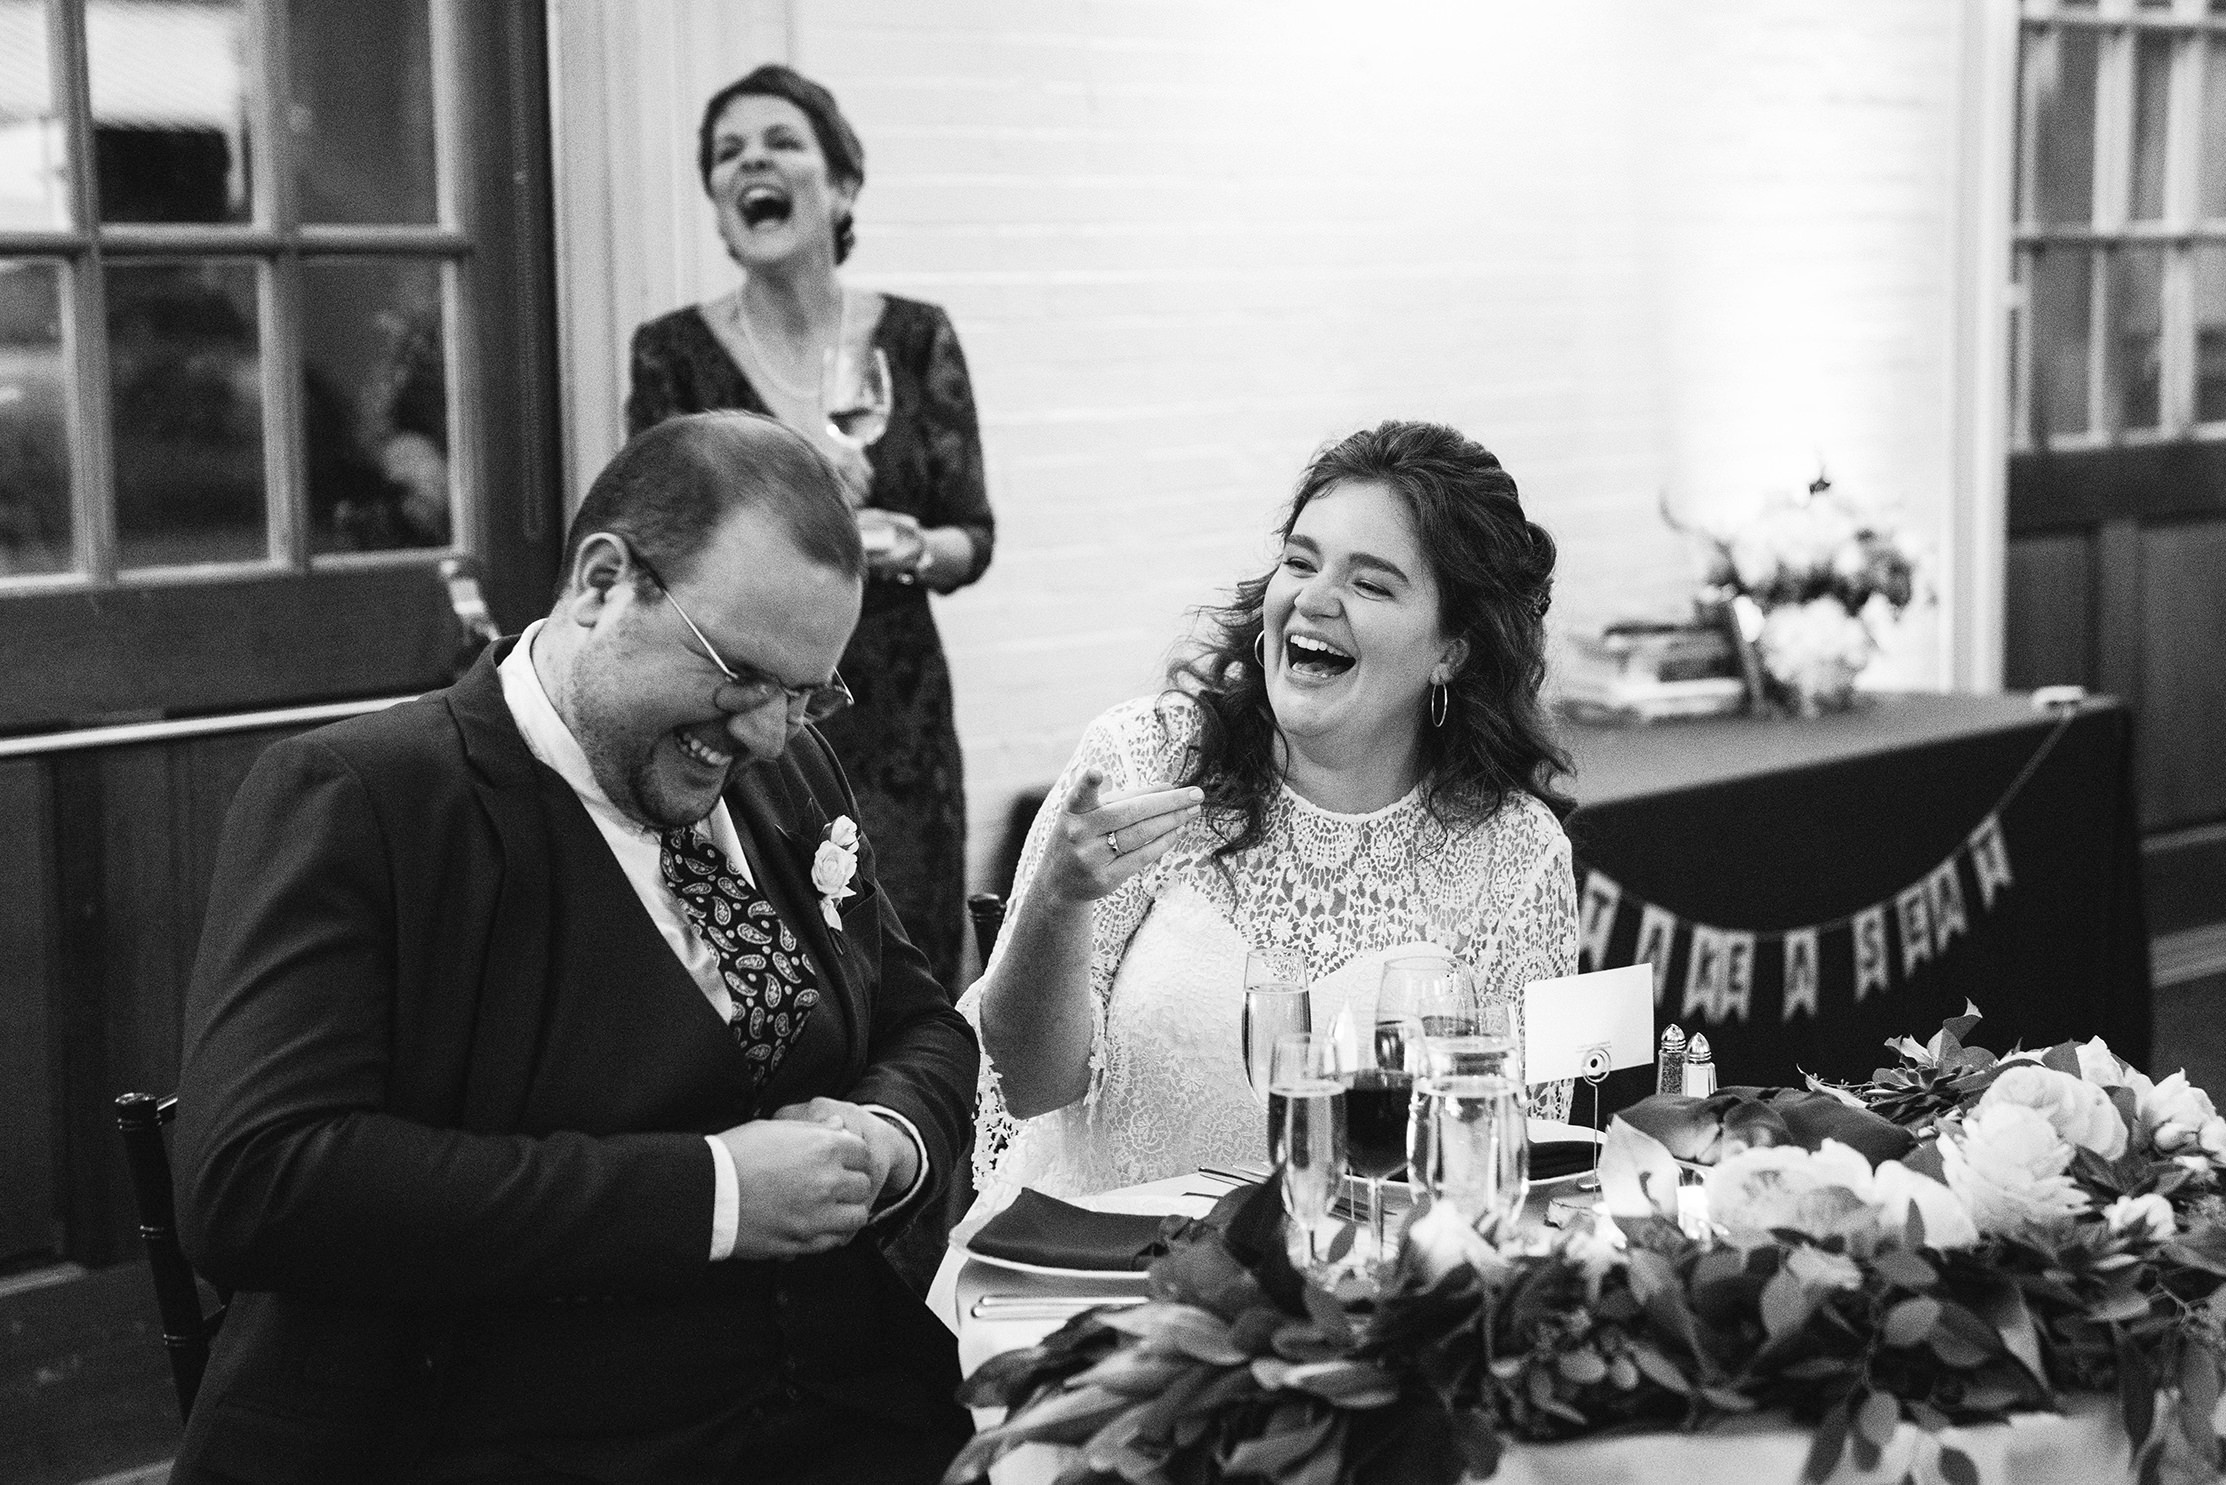 A documentary photograph featured in the best of wedding photography of 2019 showing a bride and groom laughing during their wedding toasts